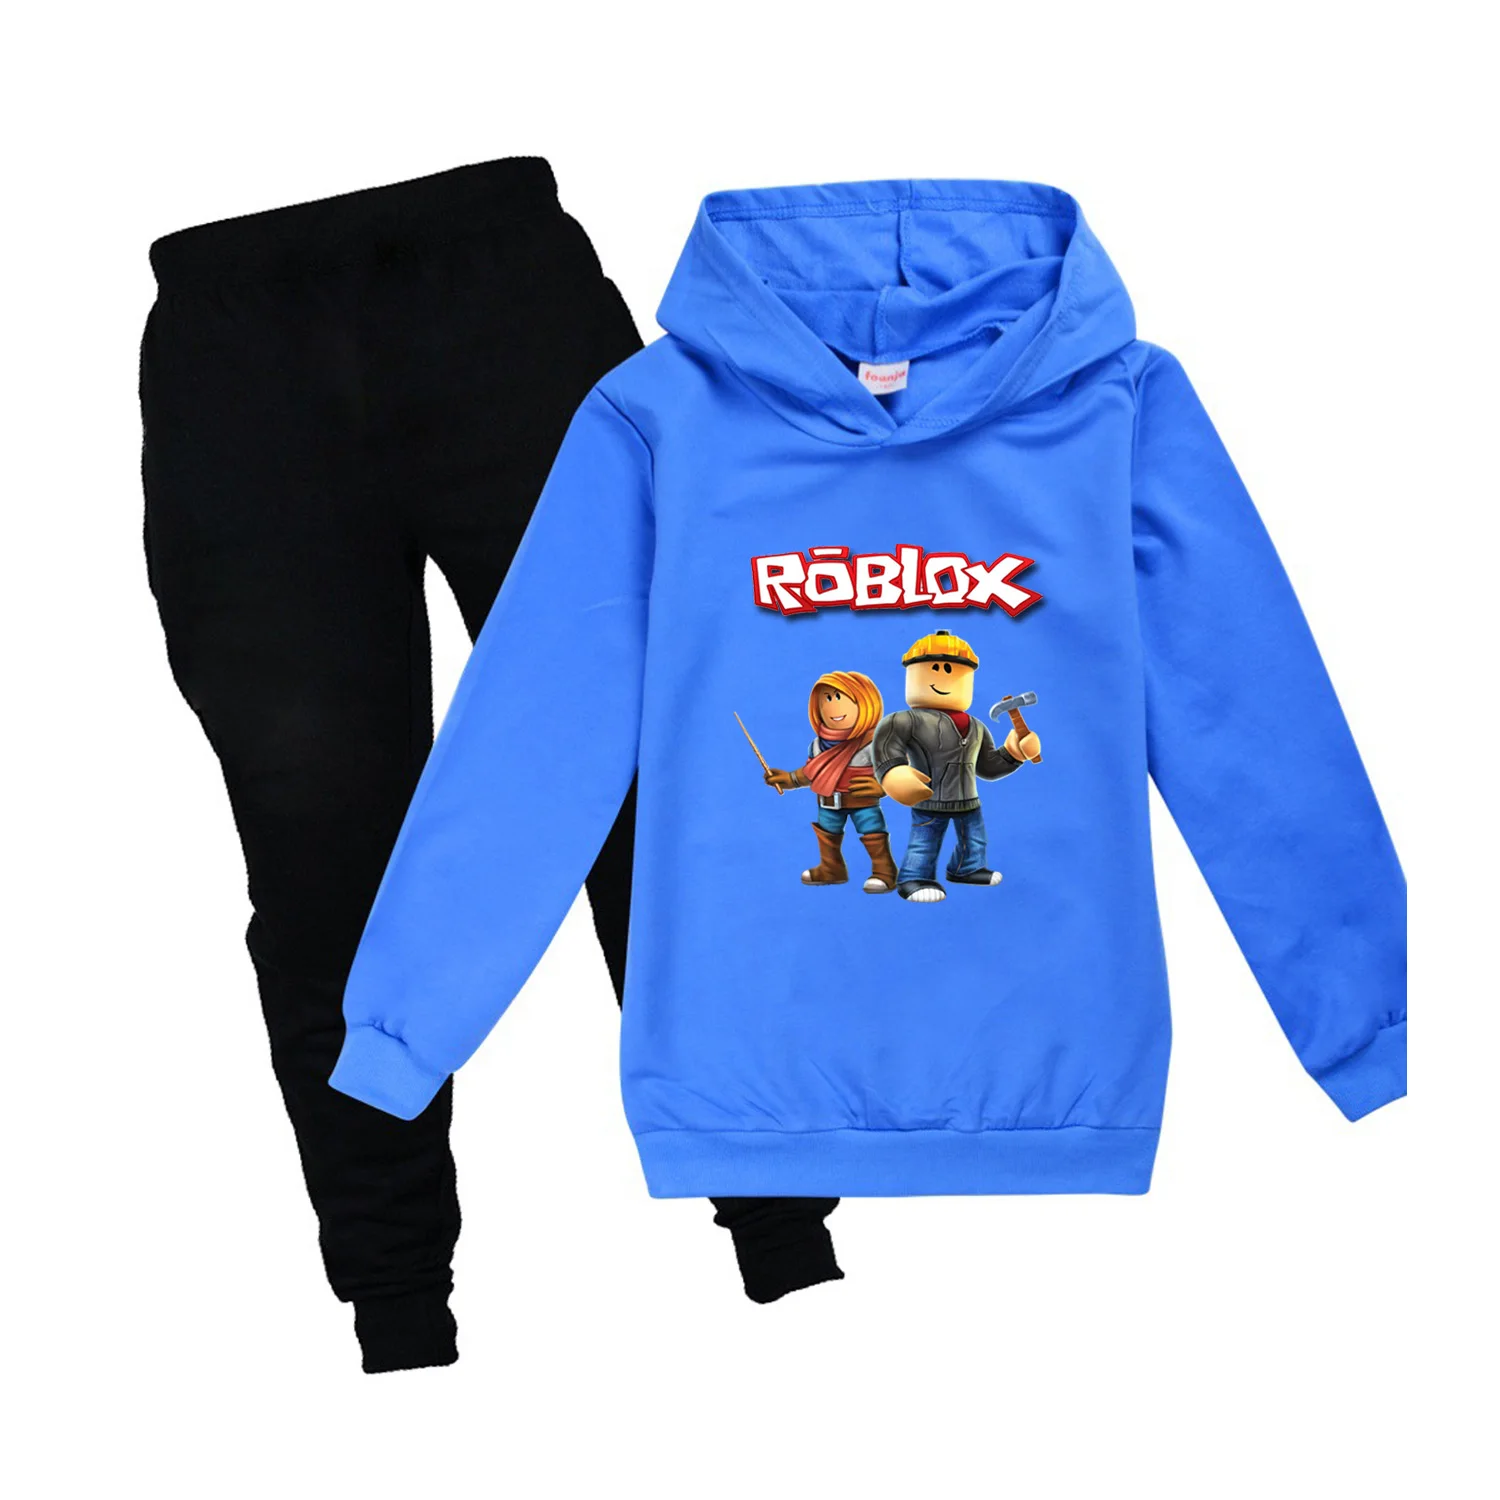 EXV R-oblox Hoodie and Sweatpants 2 Piece Pullover Sweatshirt Suit for Boys Girls Youth Teens 